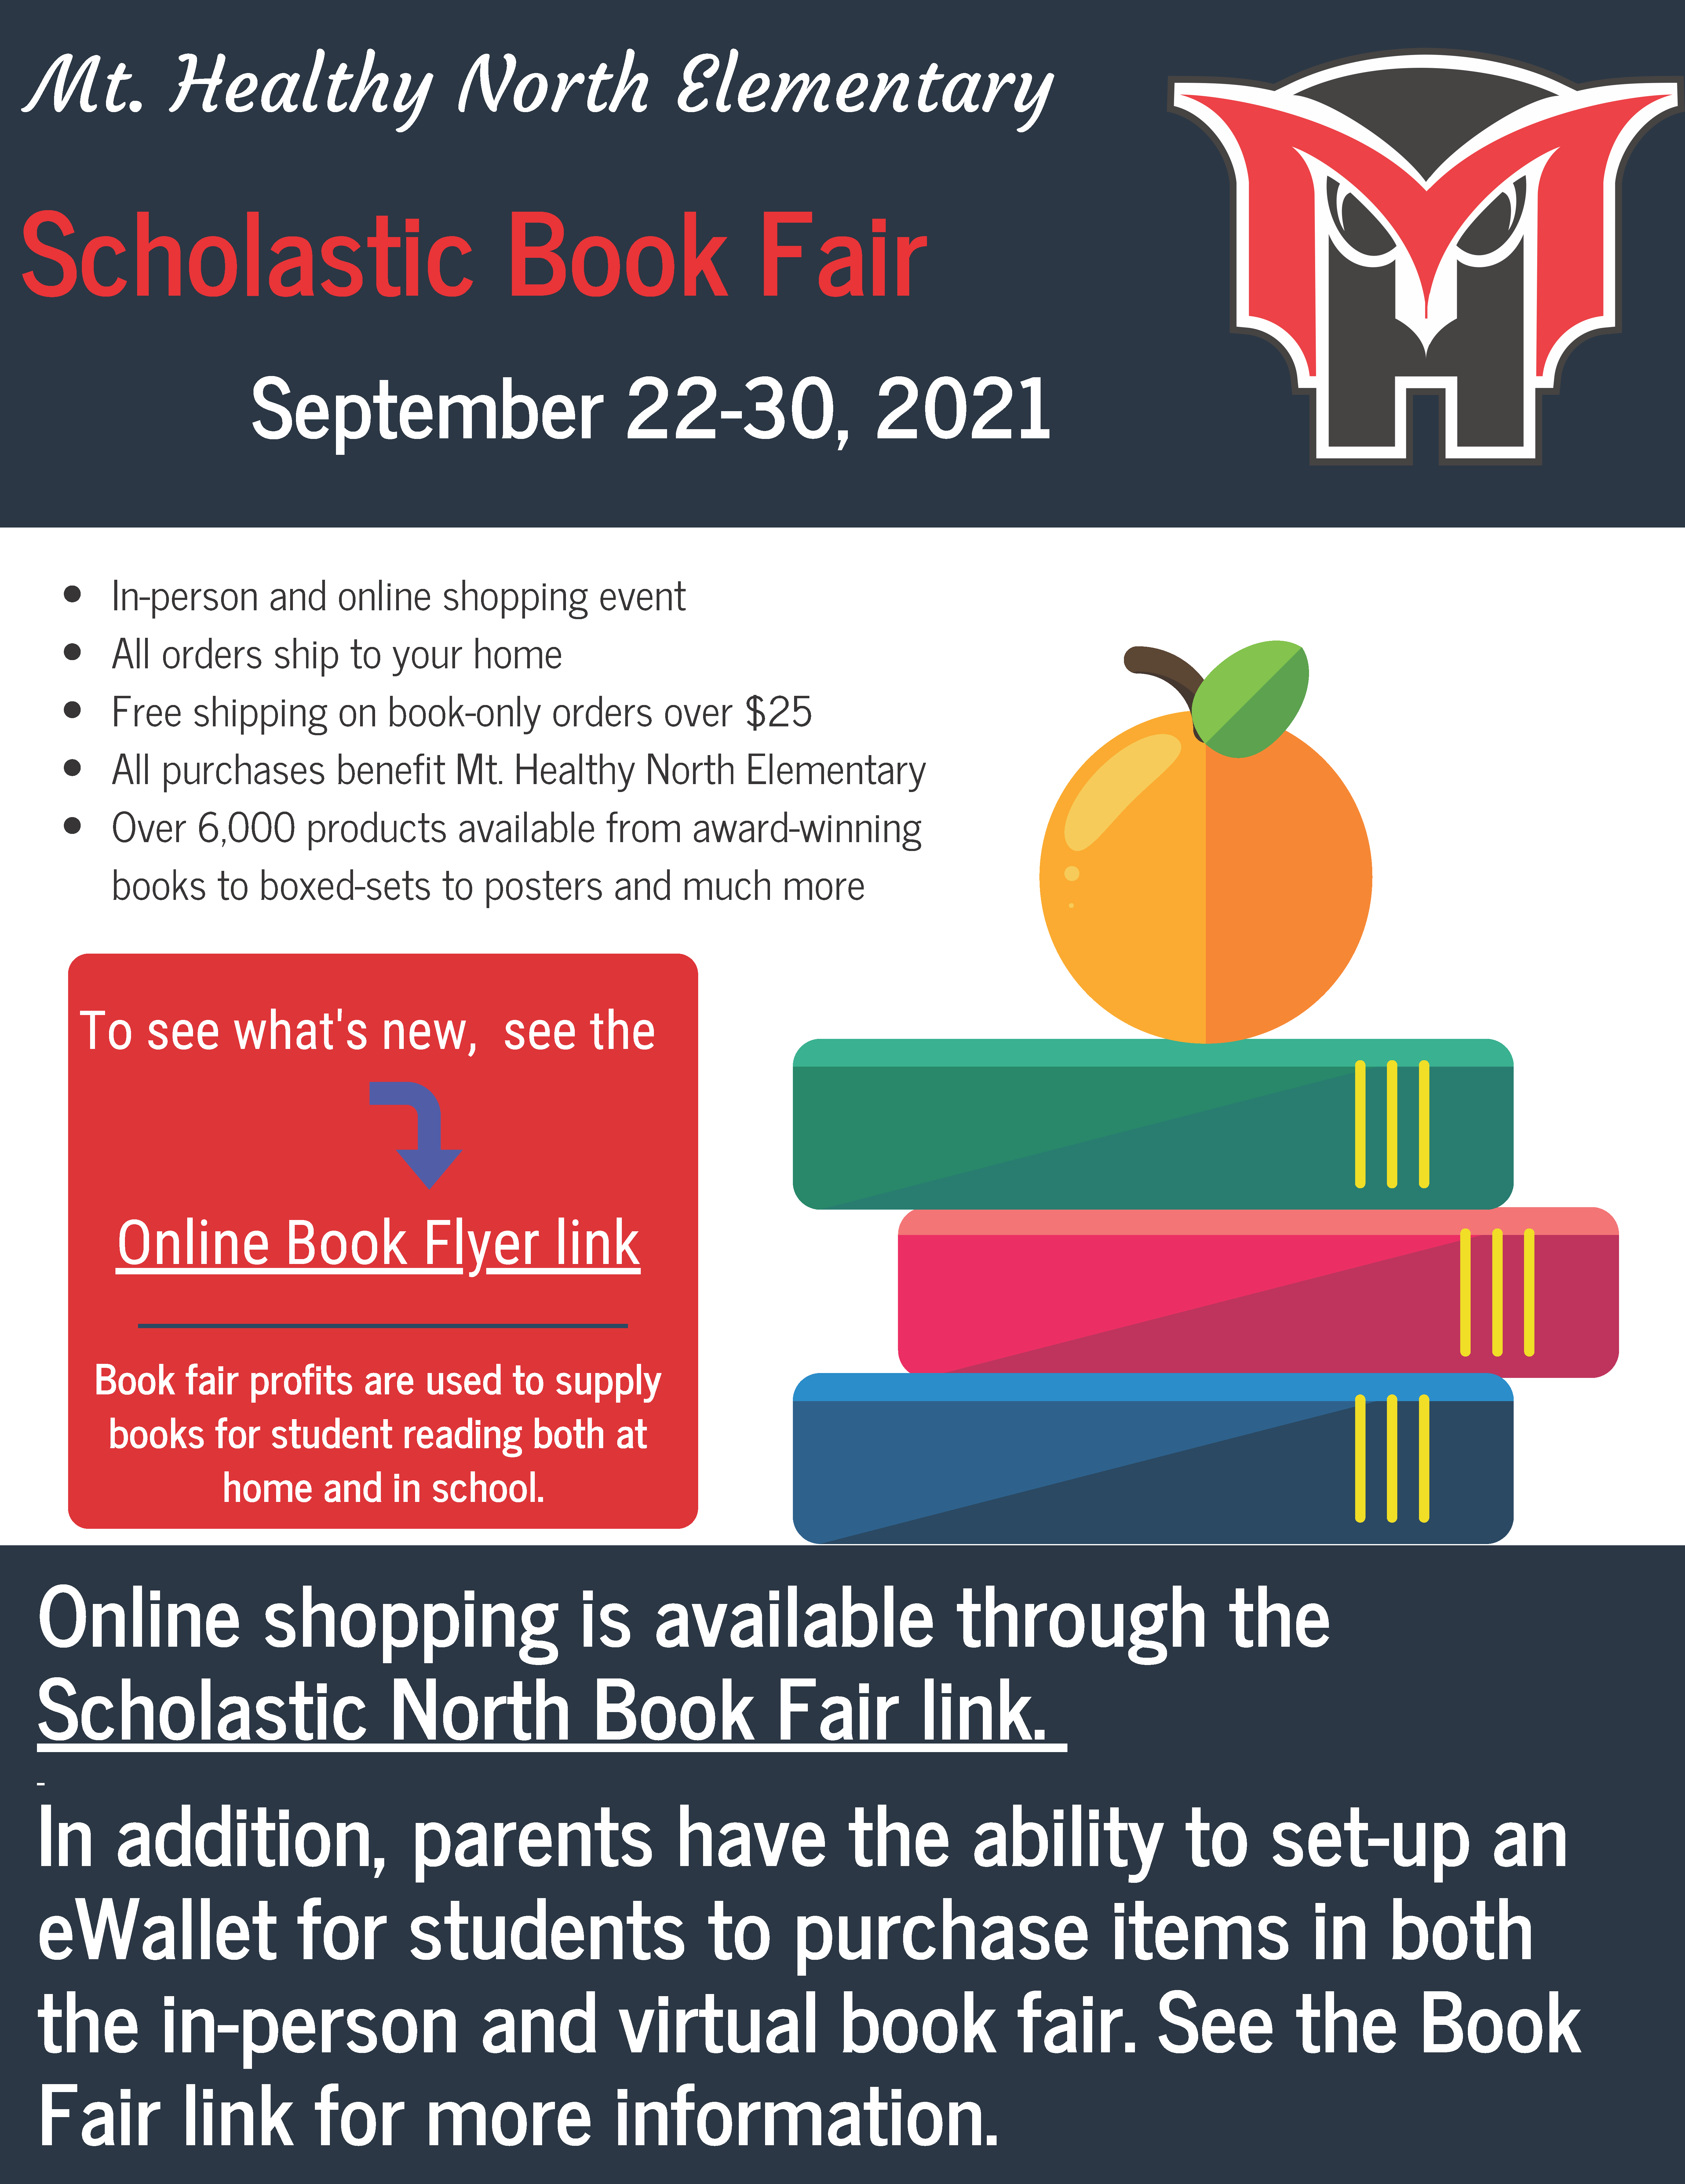 north elementary book fair flyer online information posted with the text